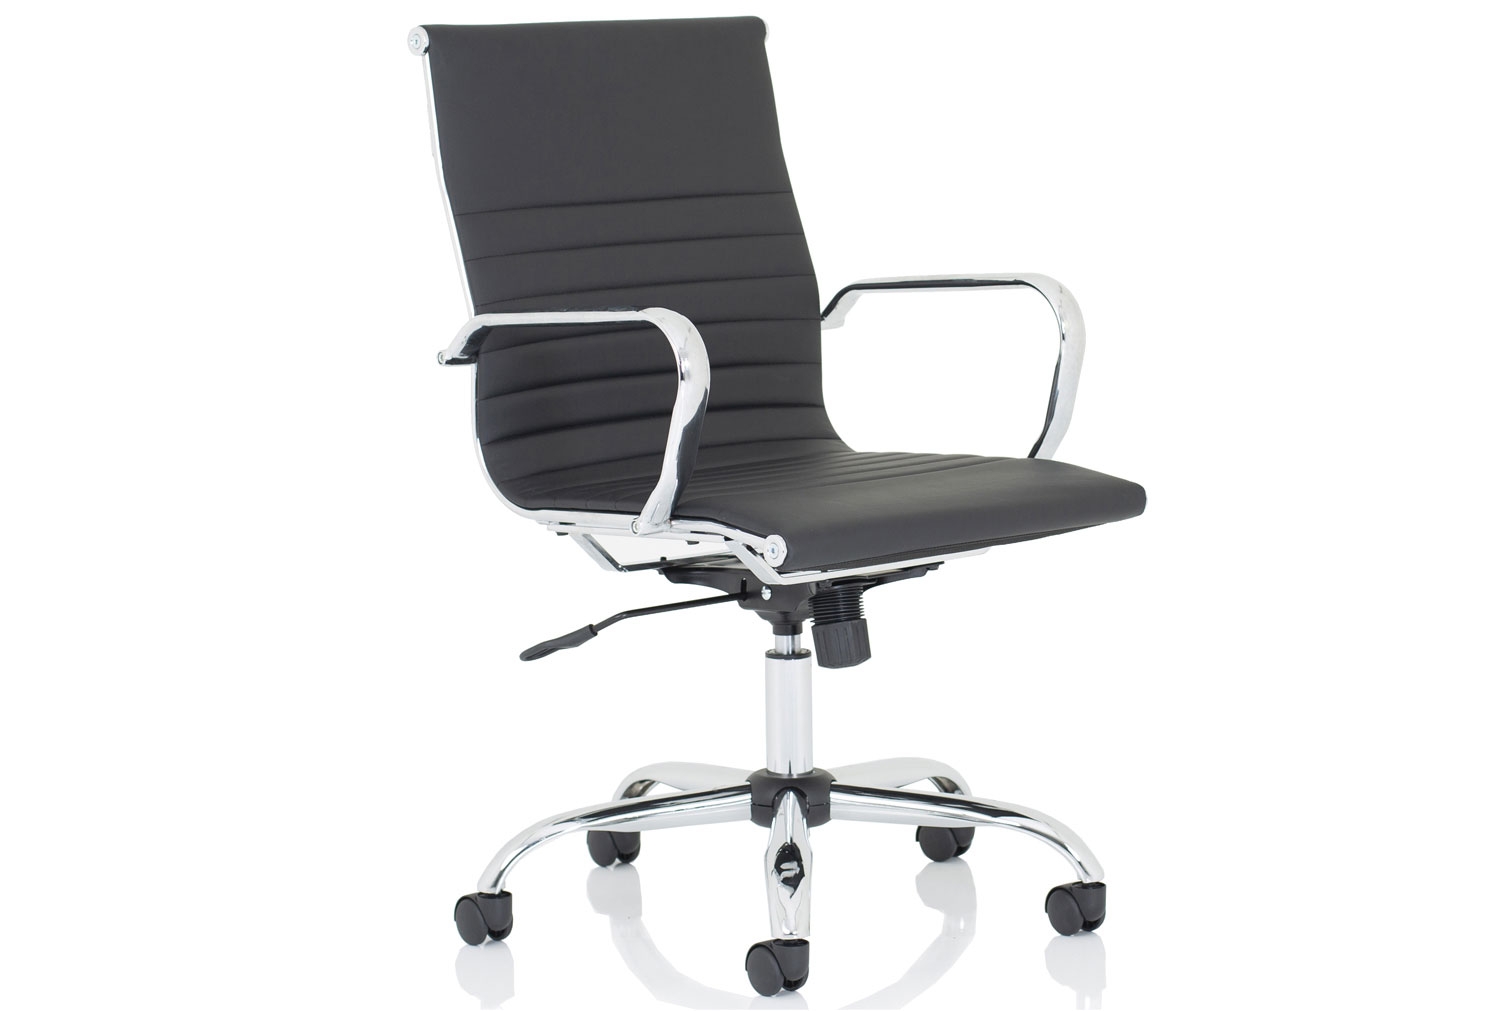 Besos Medium Back Bonded Leather Executive Office Chair (Black)